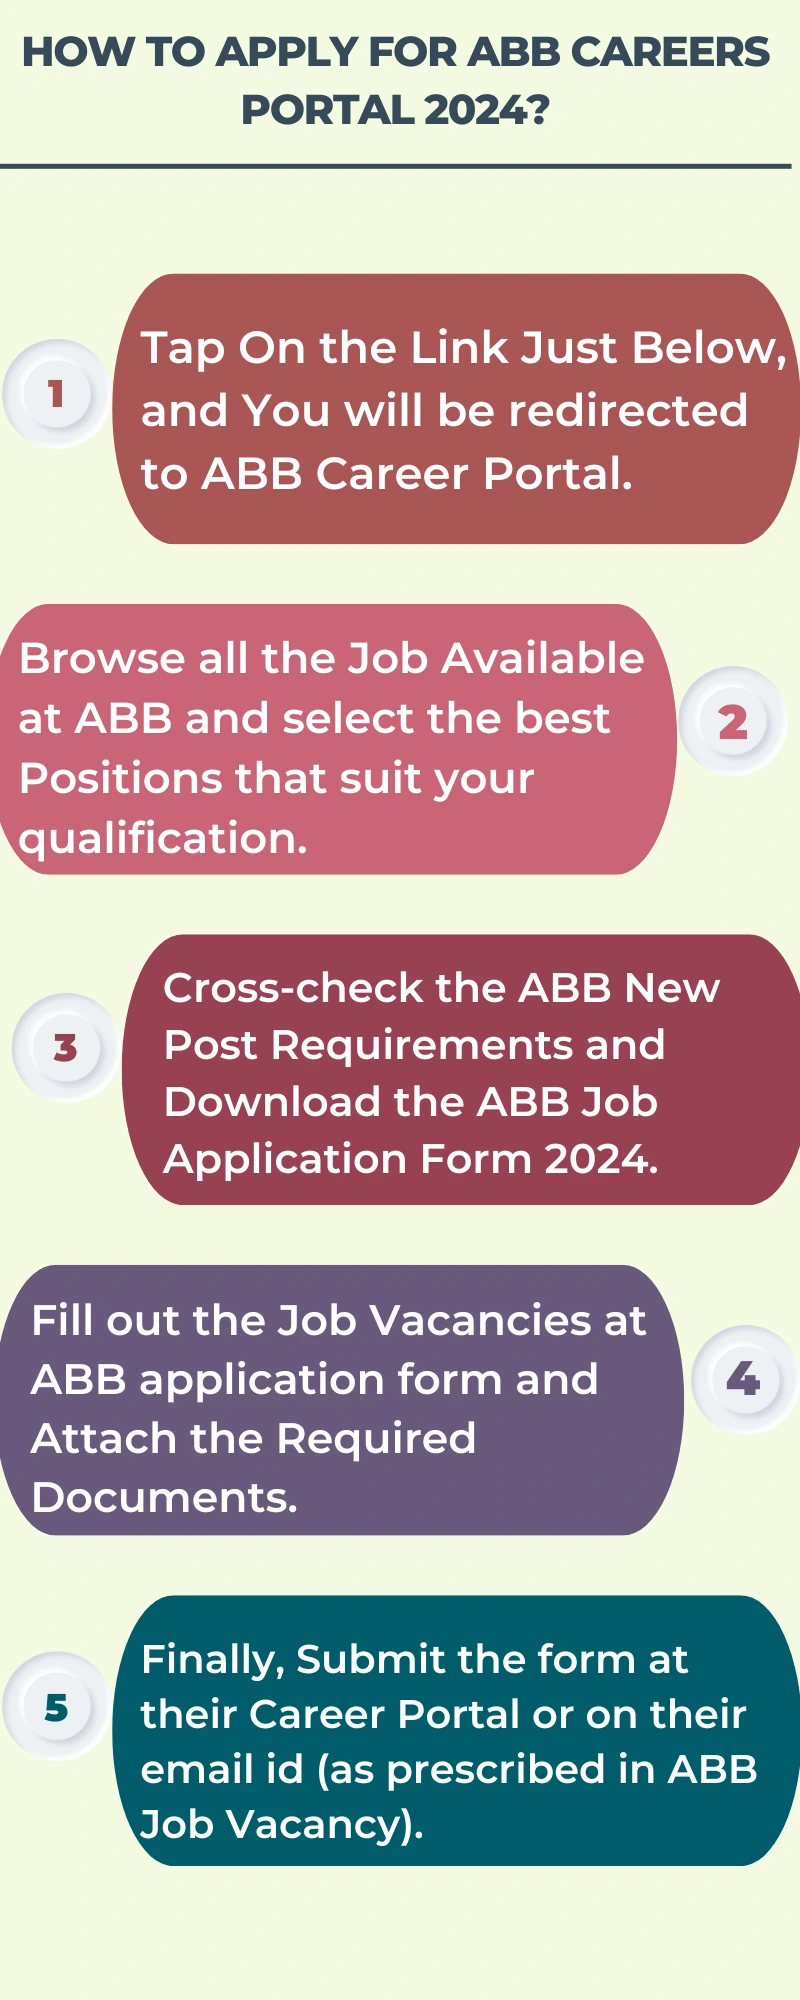 How To Apply For ABB Careers Portal 2024?